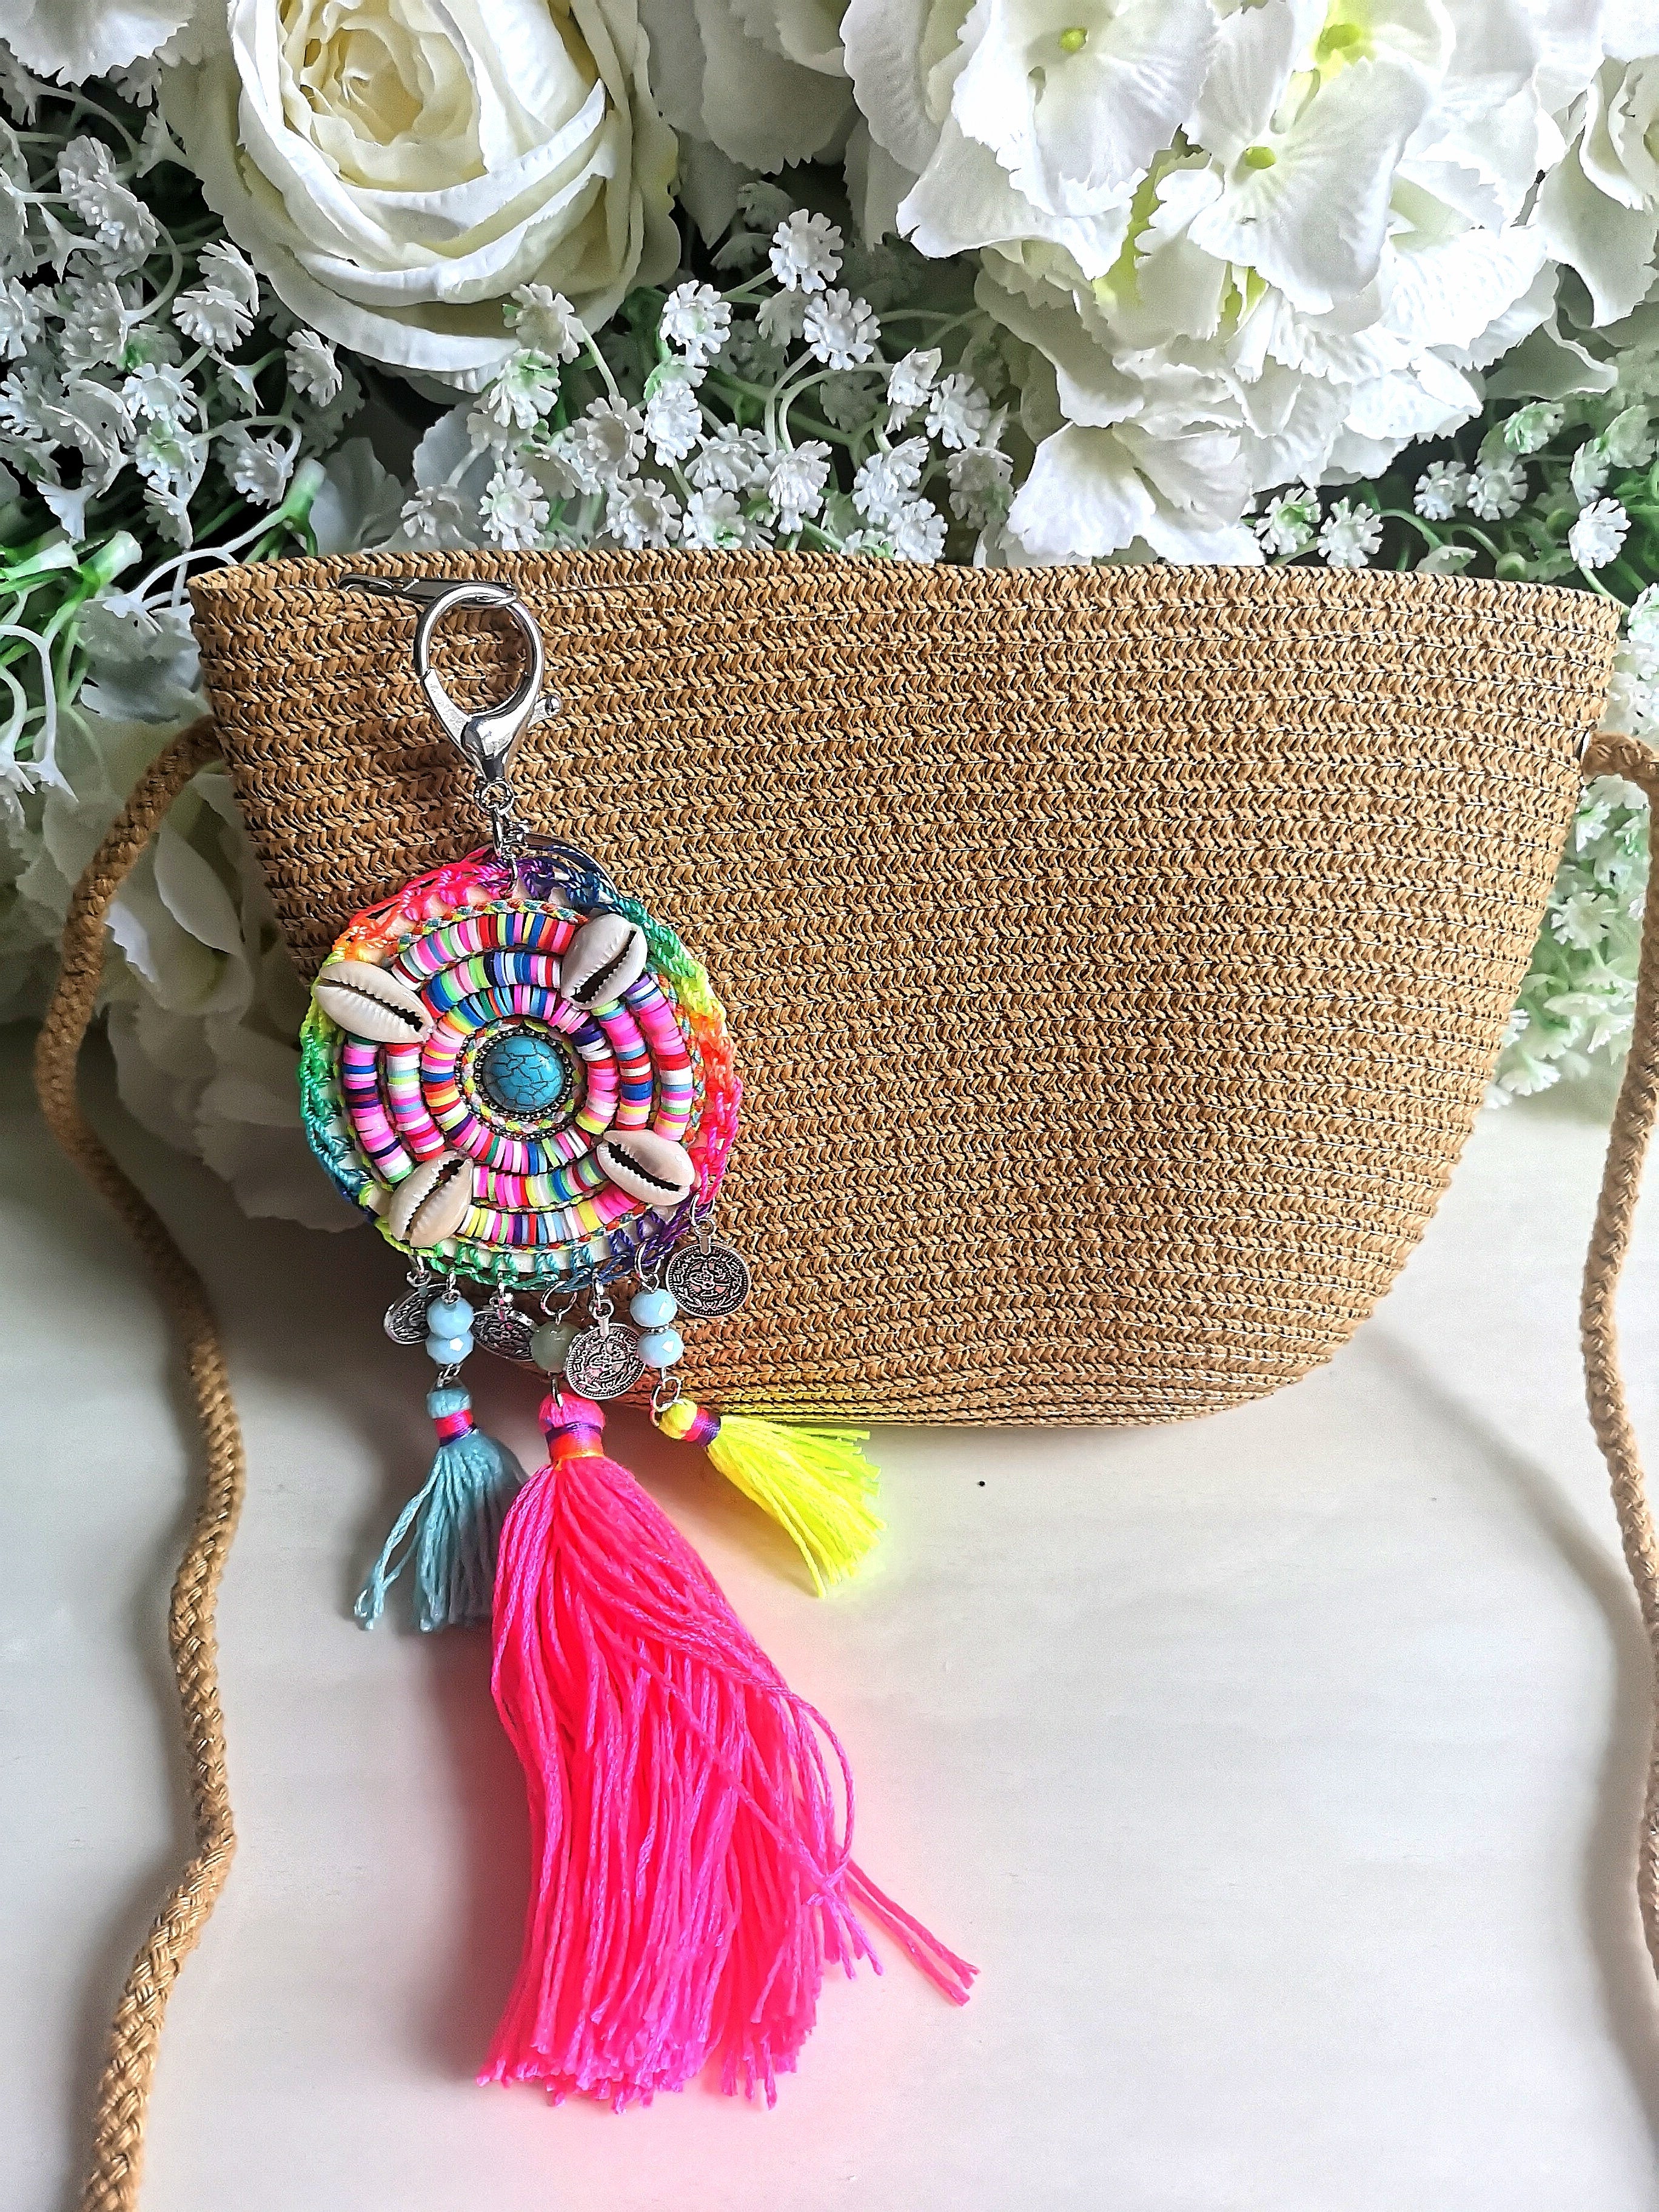 Straw bag with Charm